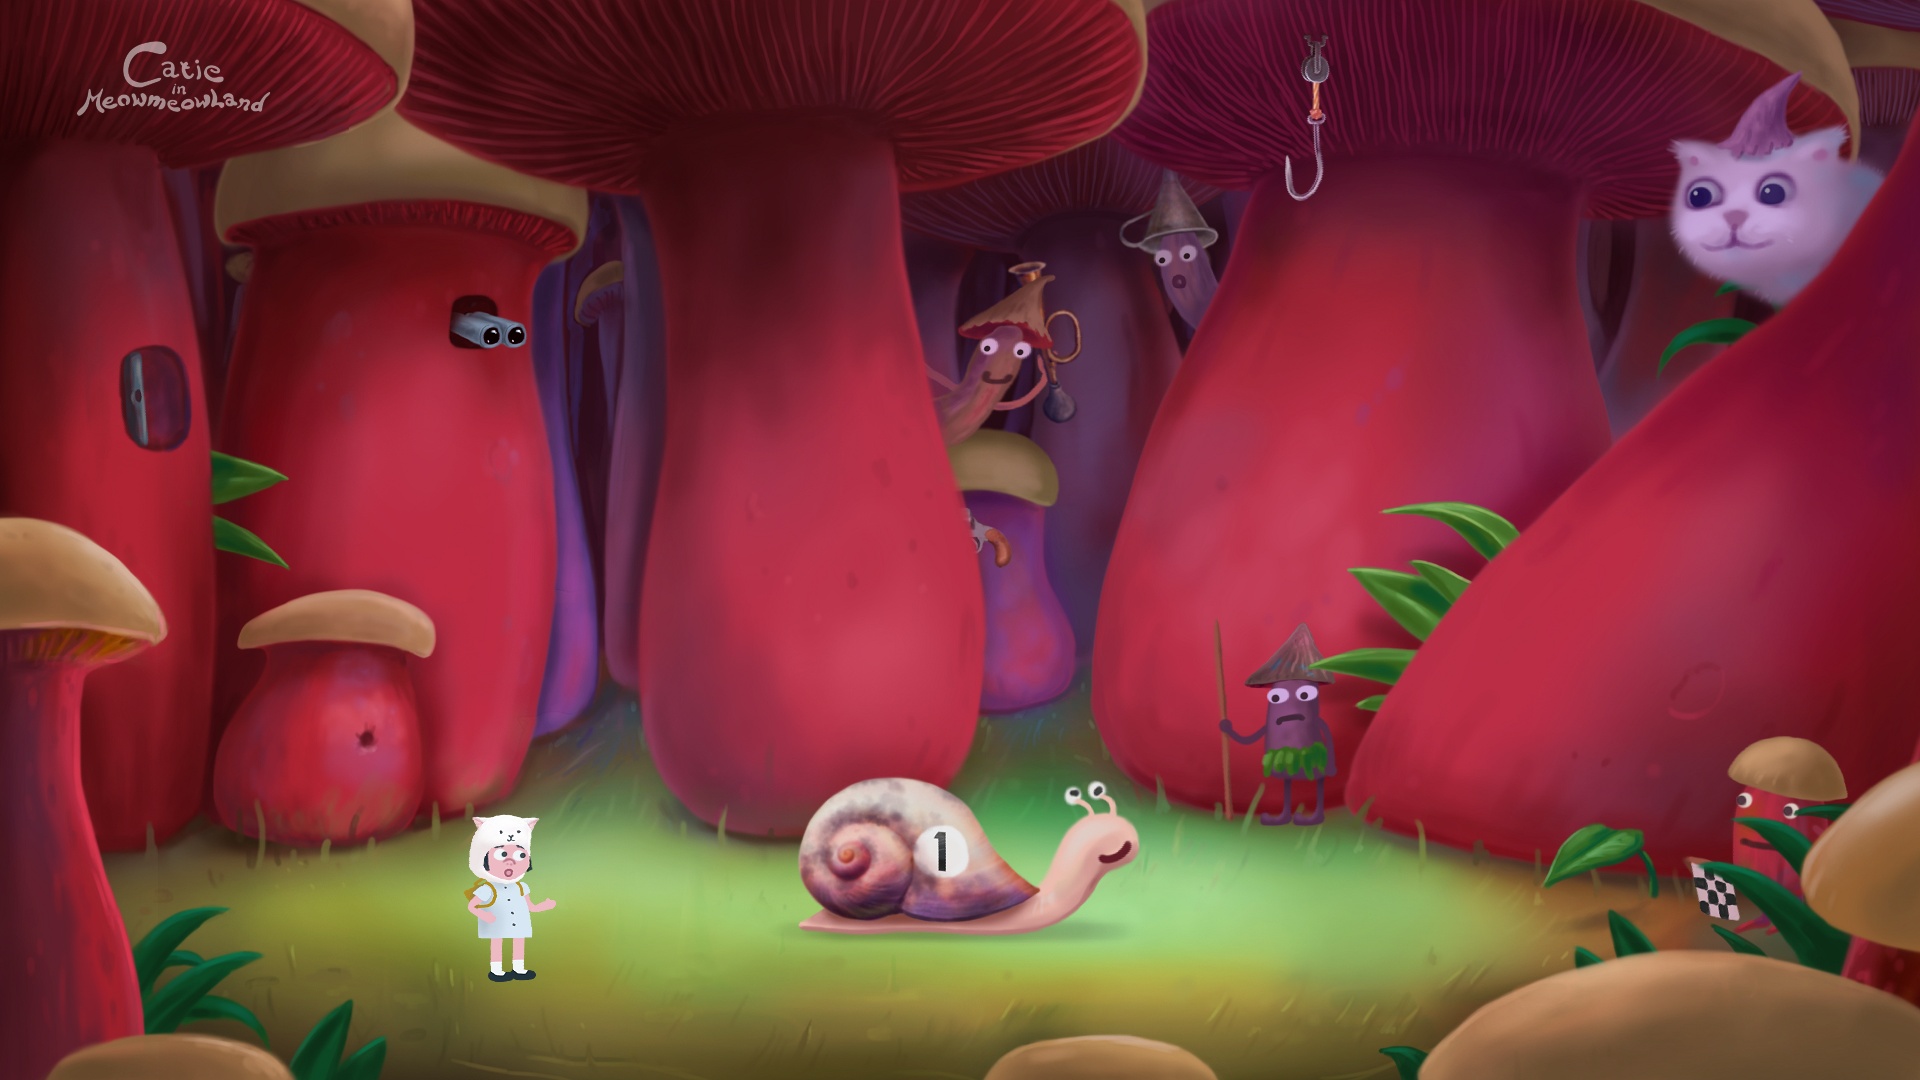 Catie in MeowmeowLand - Snail level screenshot of point-and-click adventure indie game from Slovakia